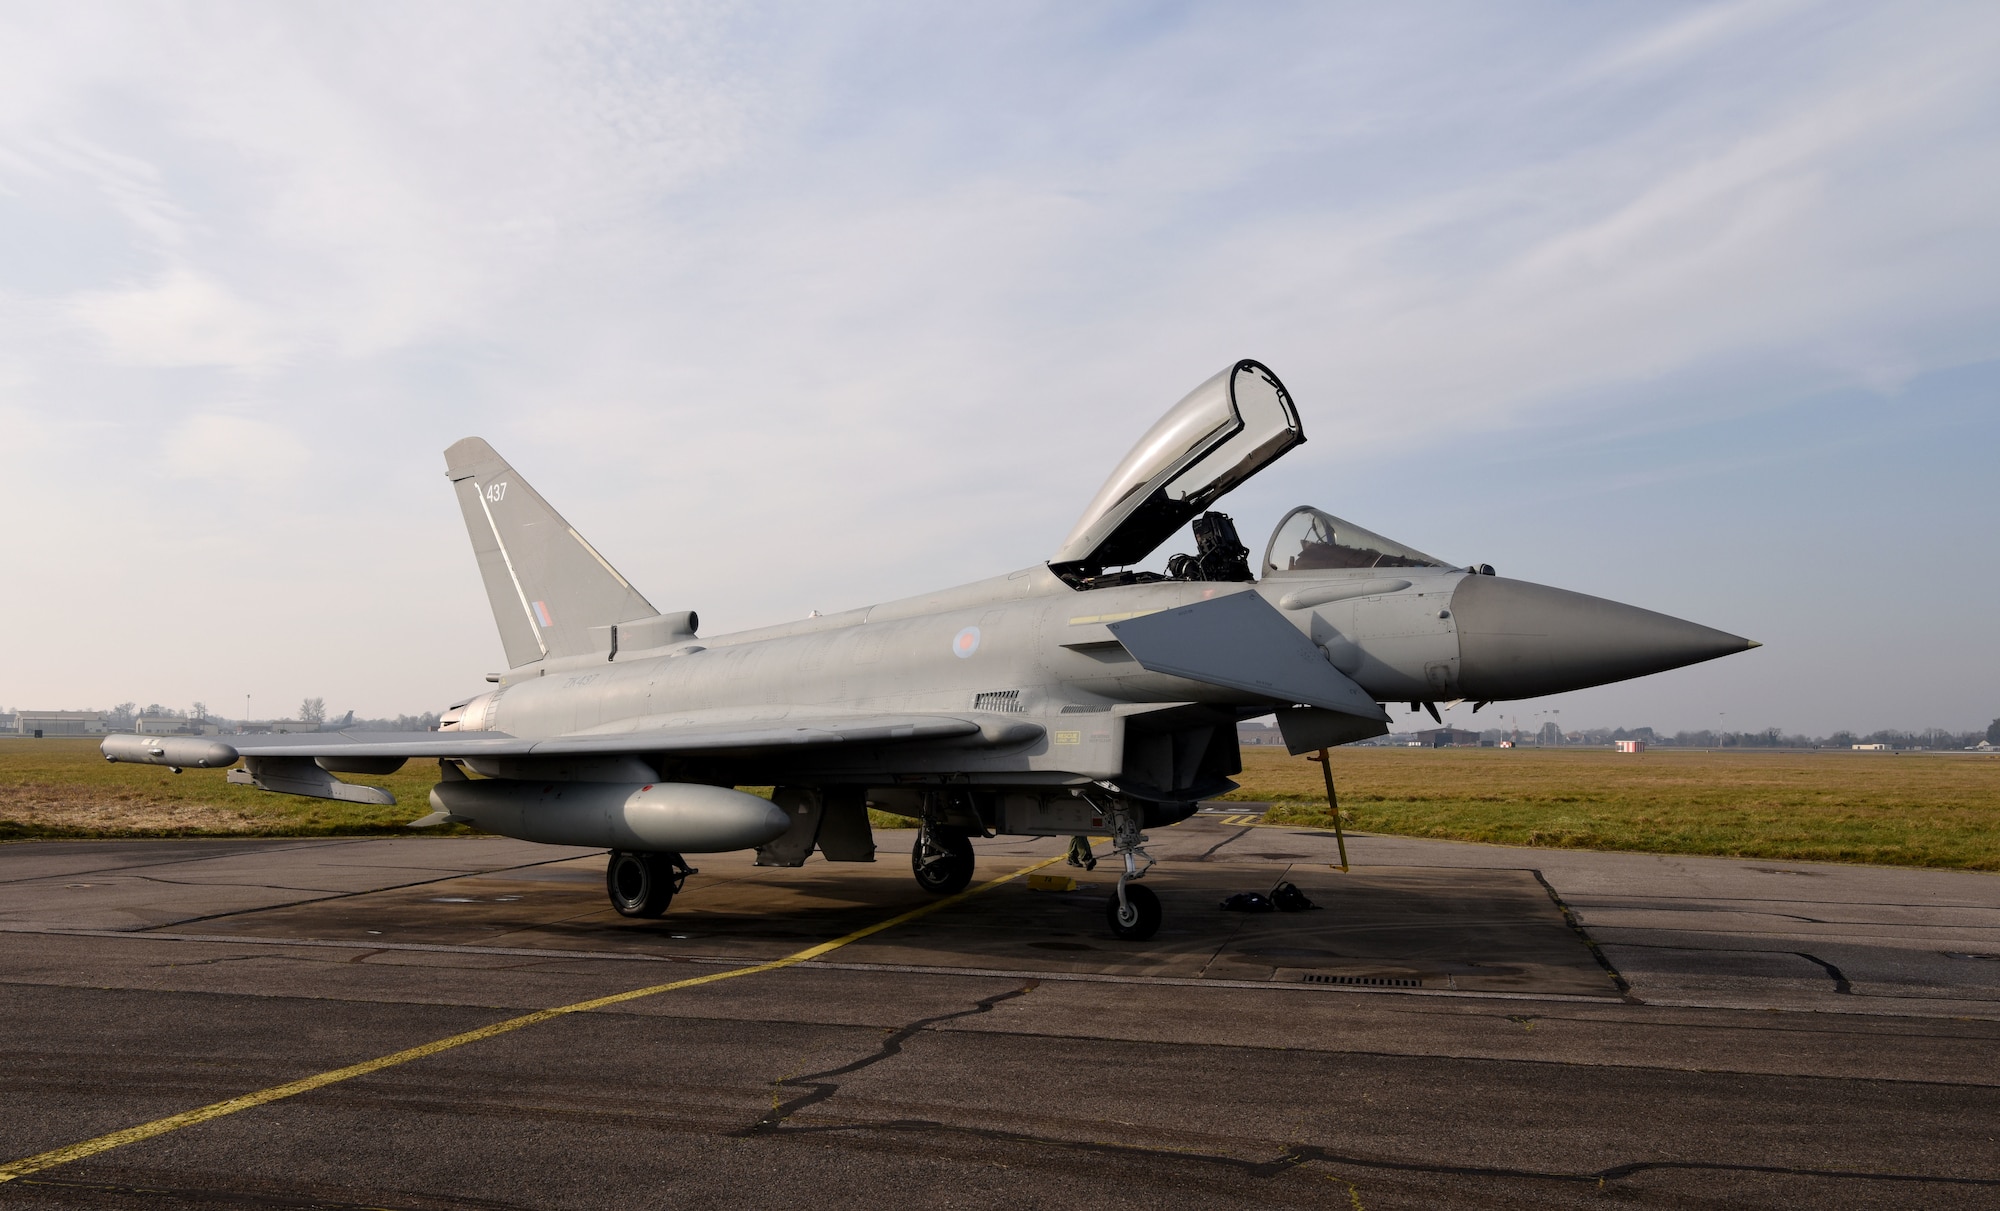 A Royal Air Force Eurofighter Typhoon FGR4 sits on the taxiway at Royal Air Force Mildenhall, England, Feb. 15, 2023. The aircraft, from RAF Coningsby, England, diverted here due to bad weather. The Typhoon is a highly capable and extremely agile multi-role combat aircraft, capable of being deployed for the full spectrum of air operations, including air policing, peace support and high-intensity conflict. (U.S. Air Force photo by Karen Abeyasekere)